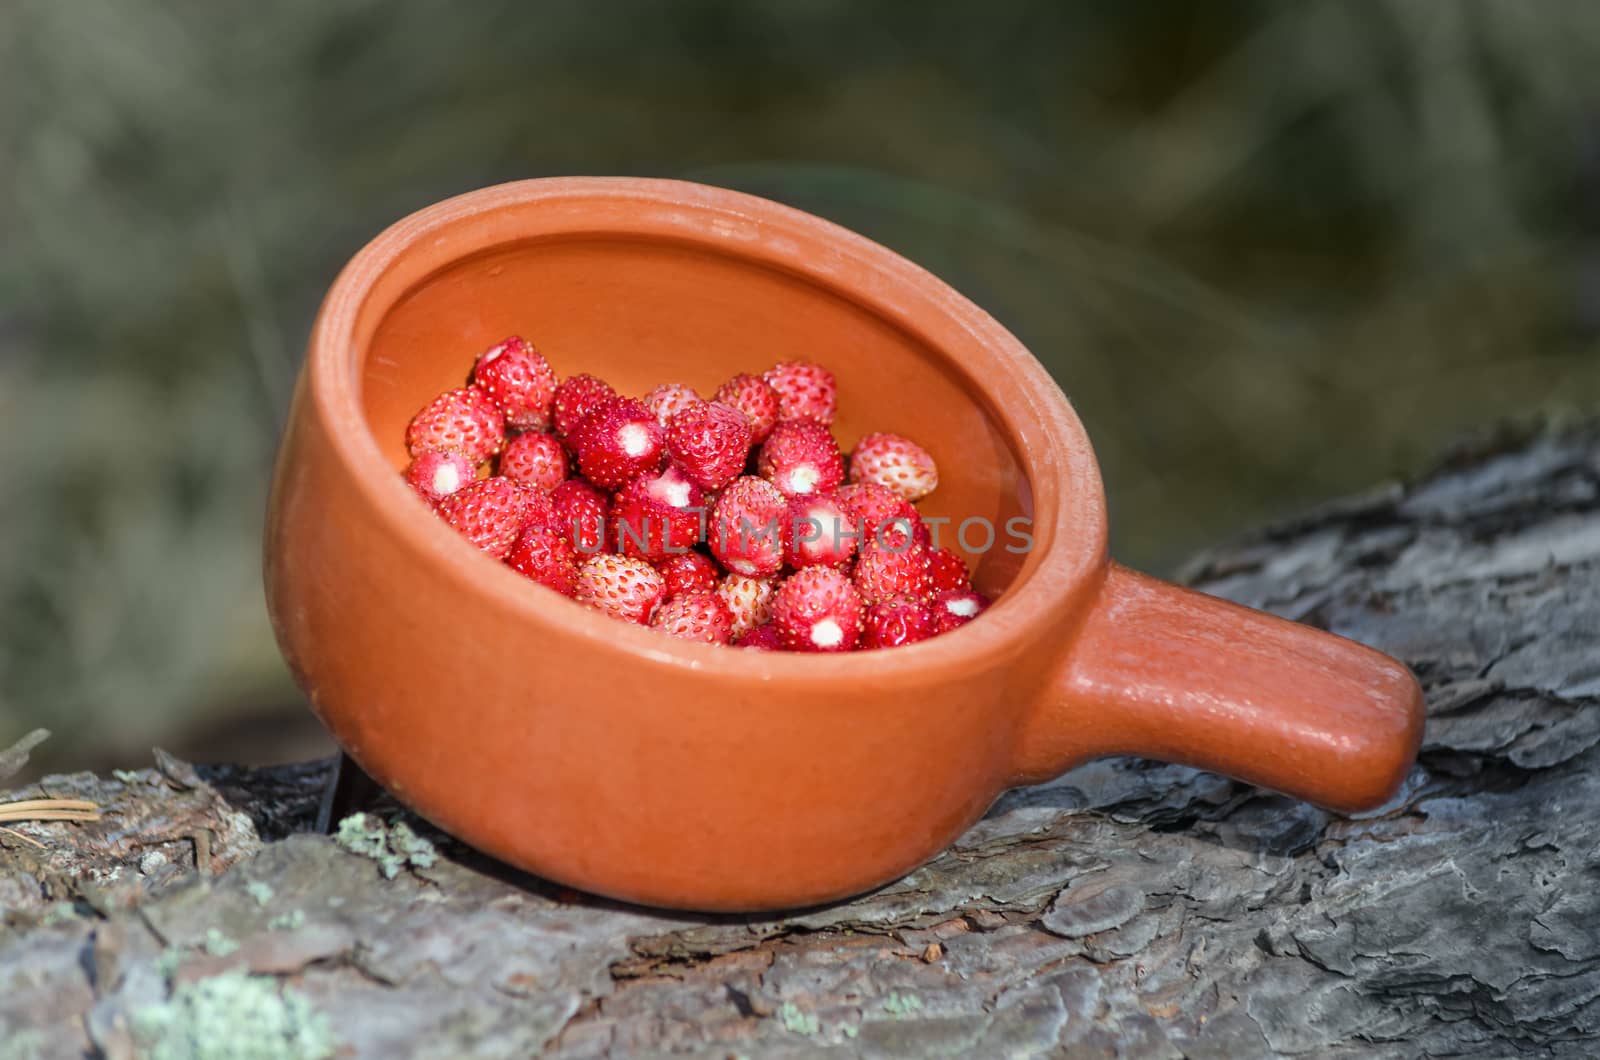 Strawberries in a ceramic bowl, standing on a fallen log in the forest